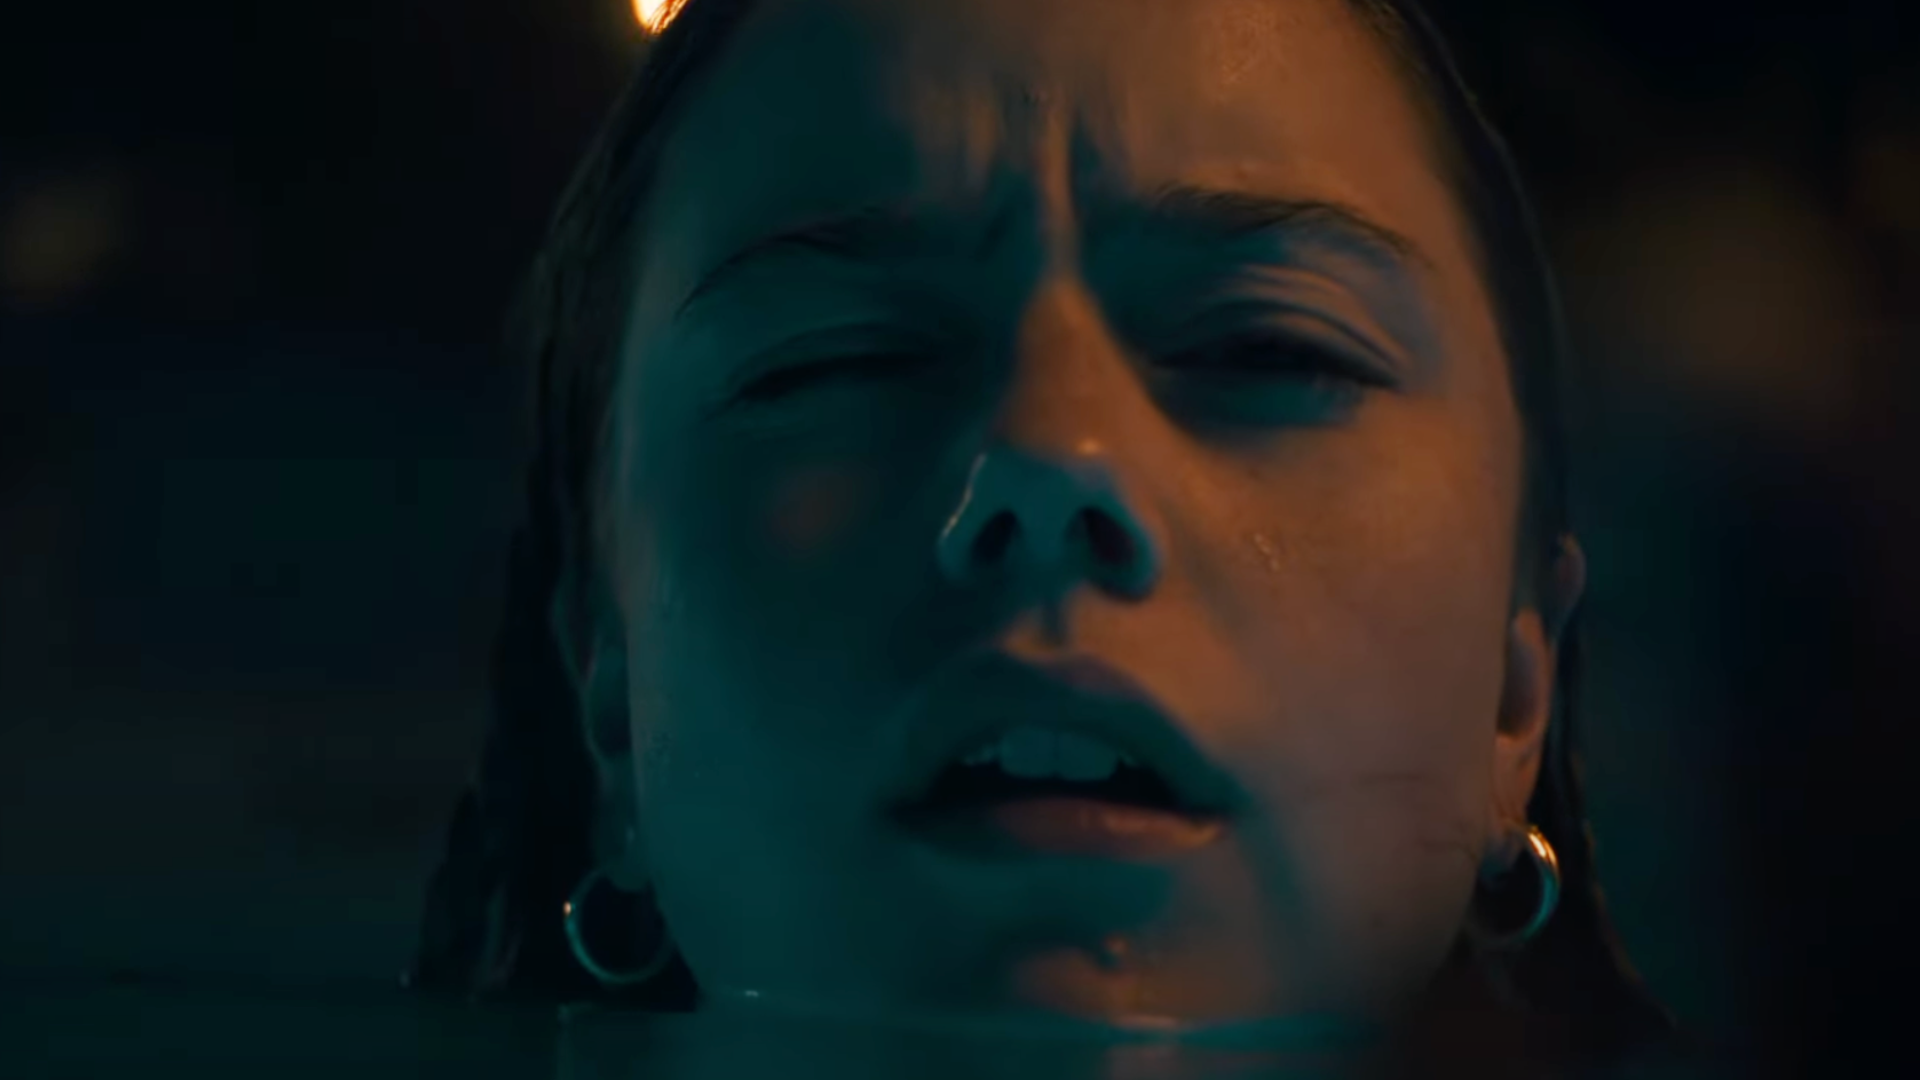 A New Trailer For Night Swim Has Just Surfaced [watch]